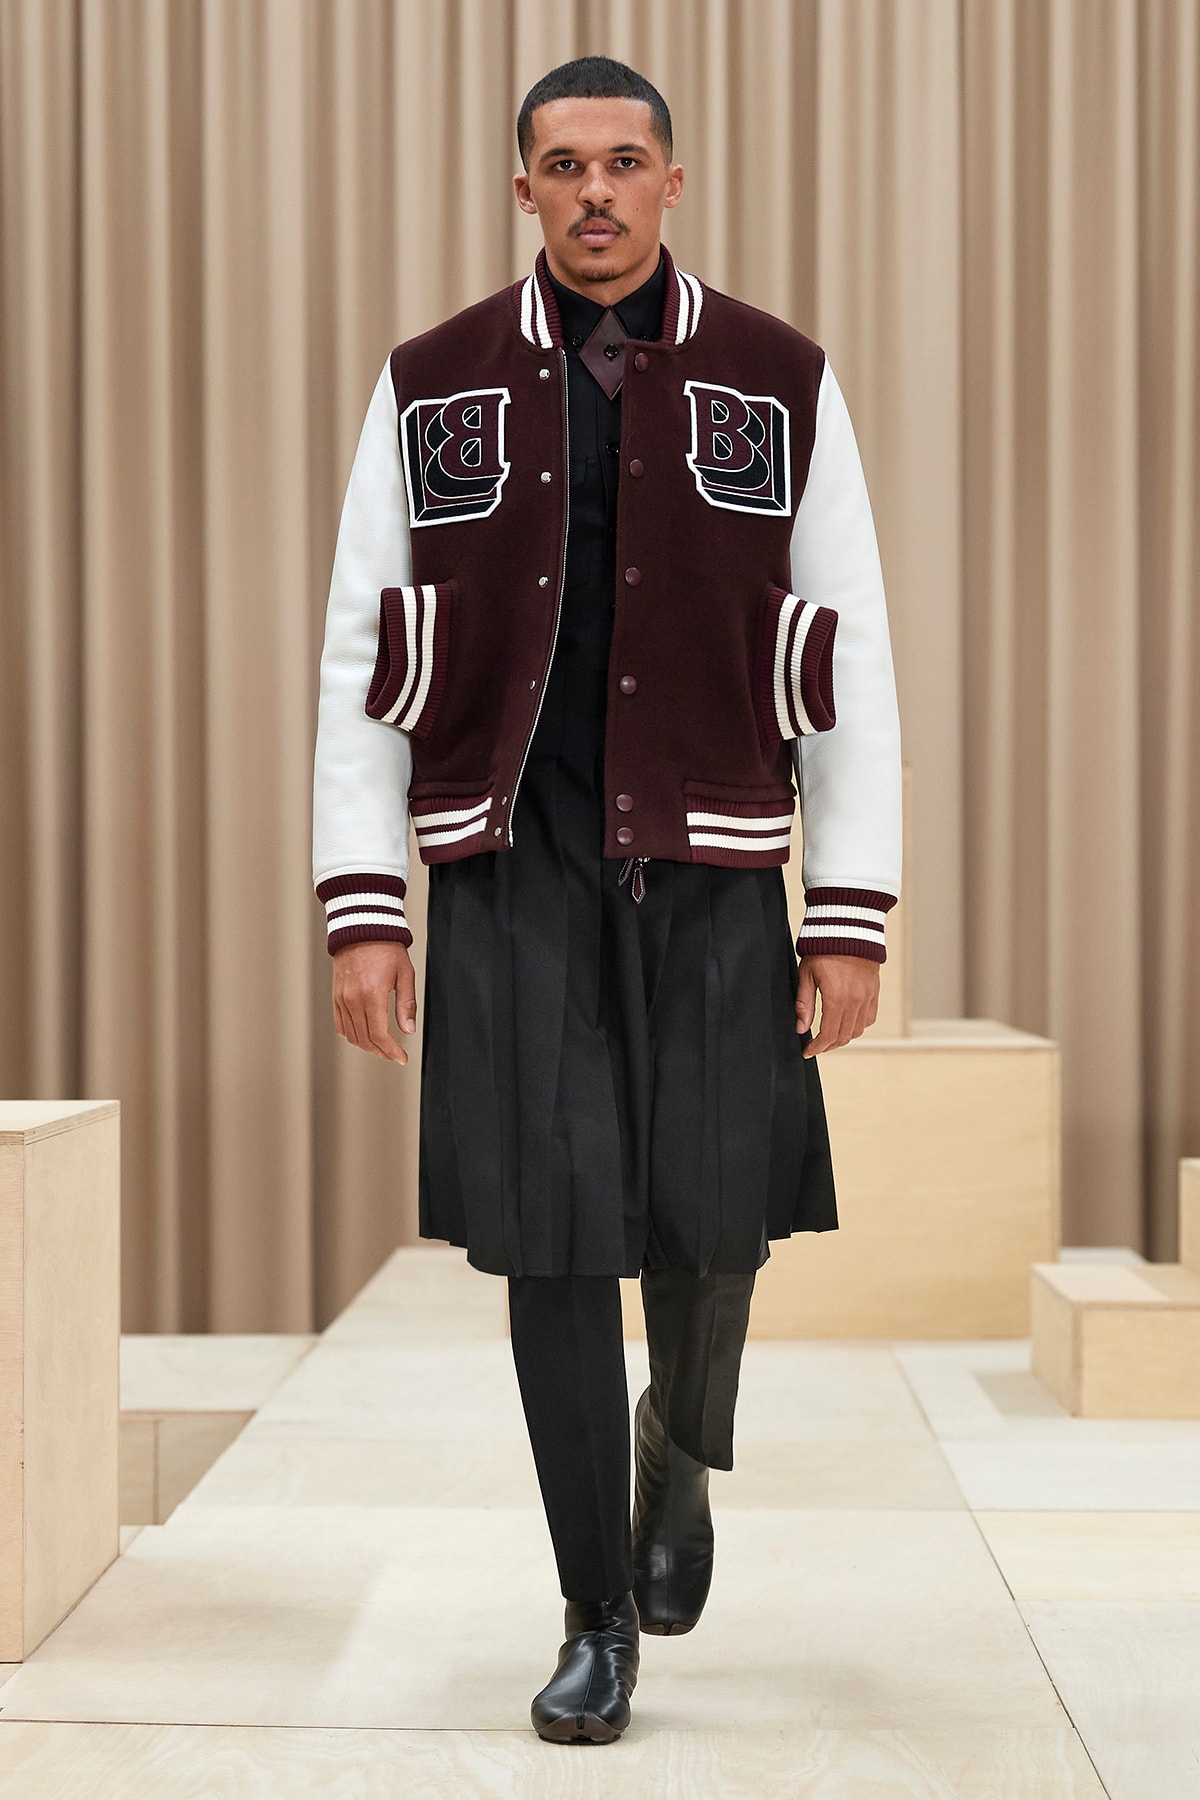 Burberry Fall/Winter 2021 Mens Escapes Show Collection Riccardo Tisci Varsity Jacket